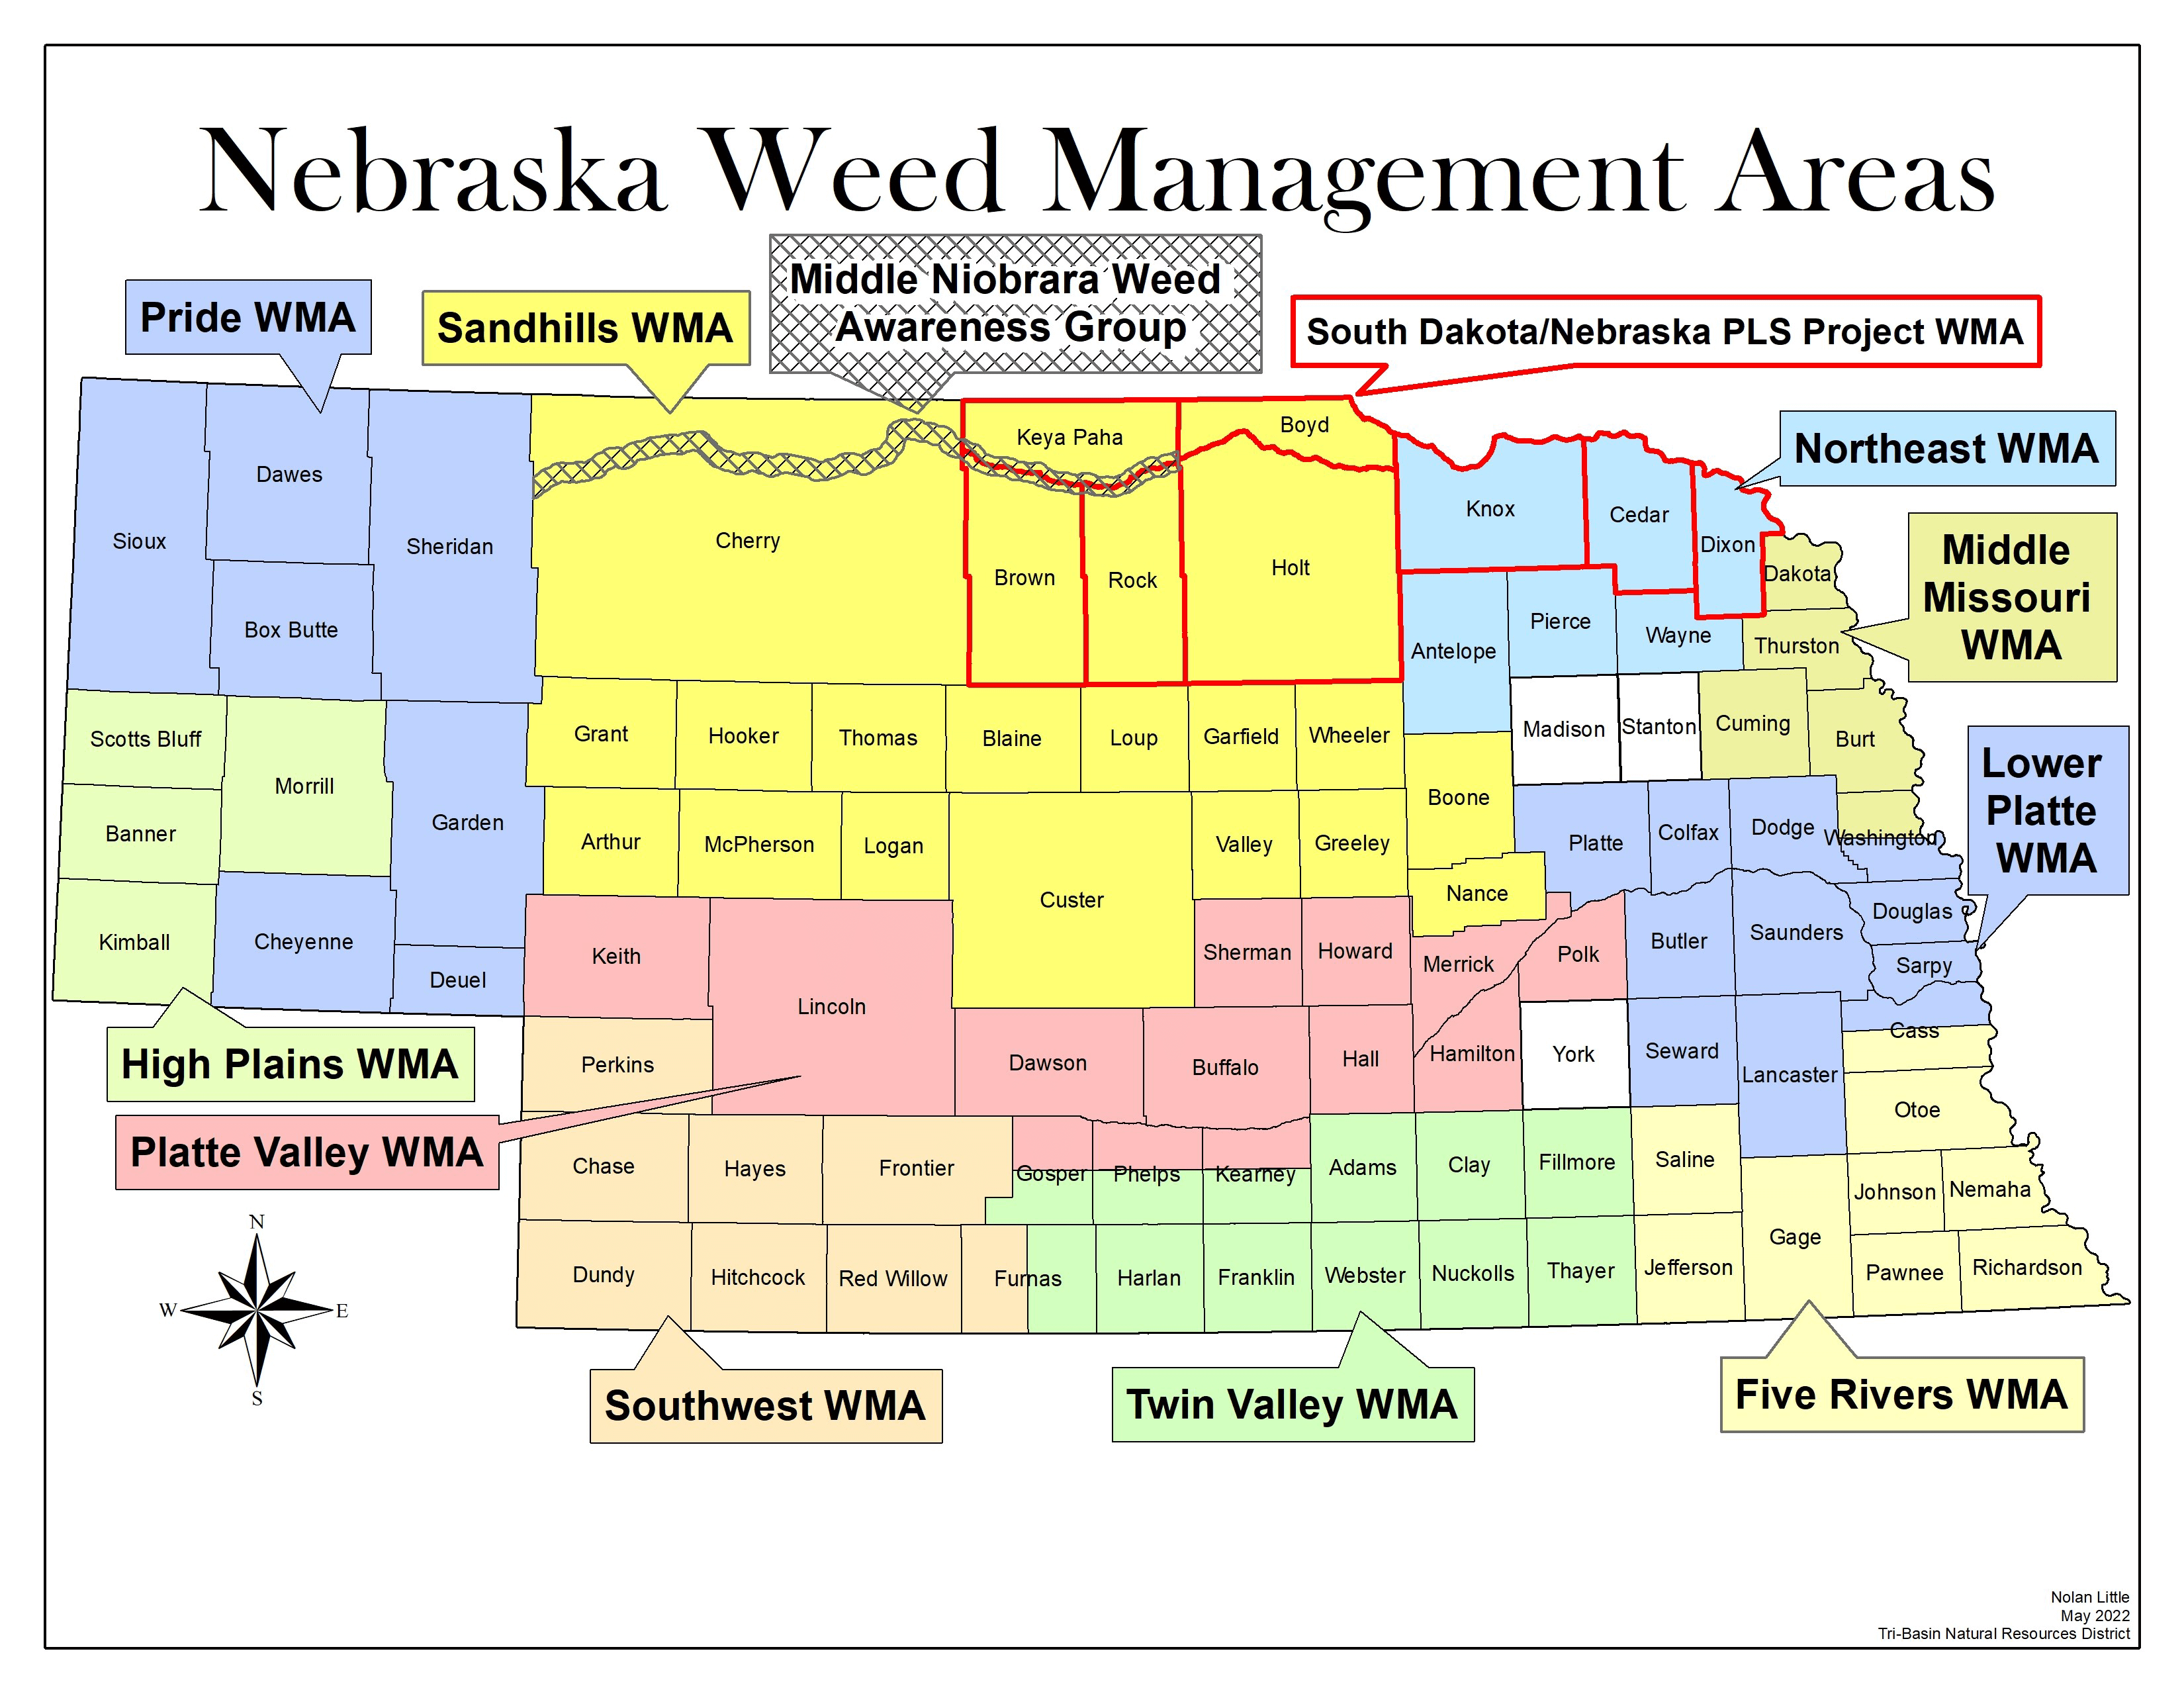 Weed Management Areas